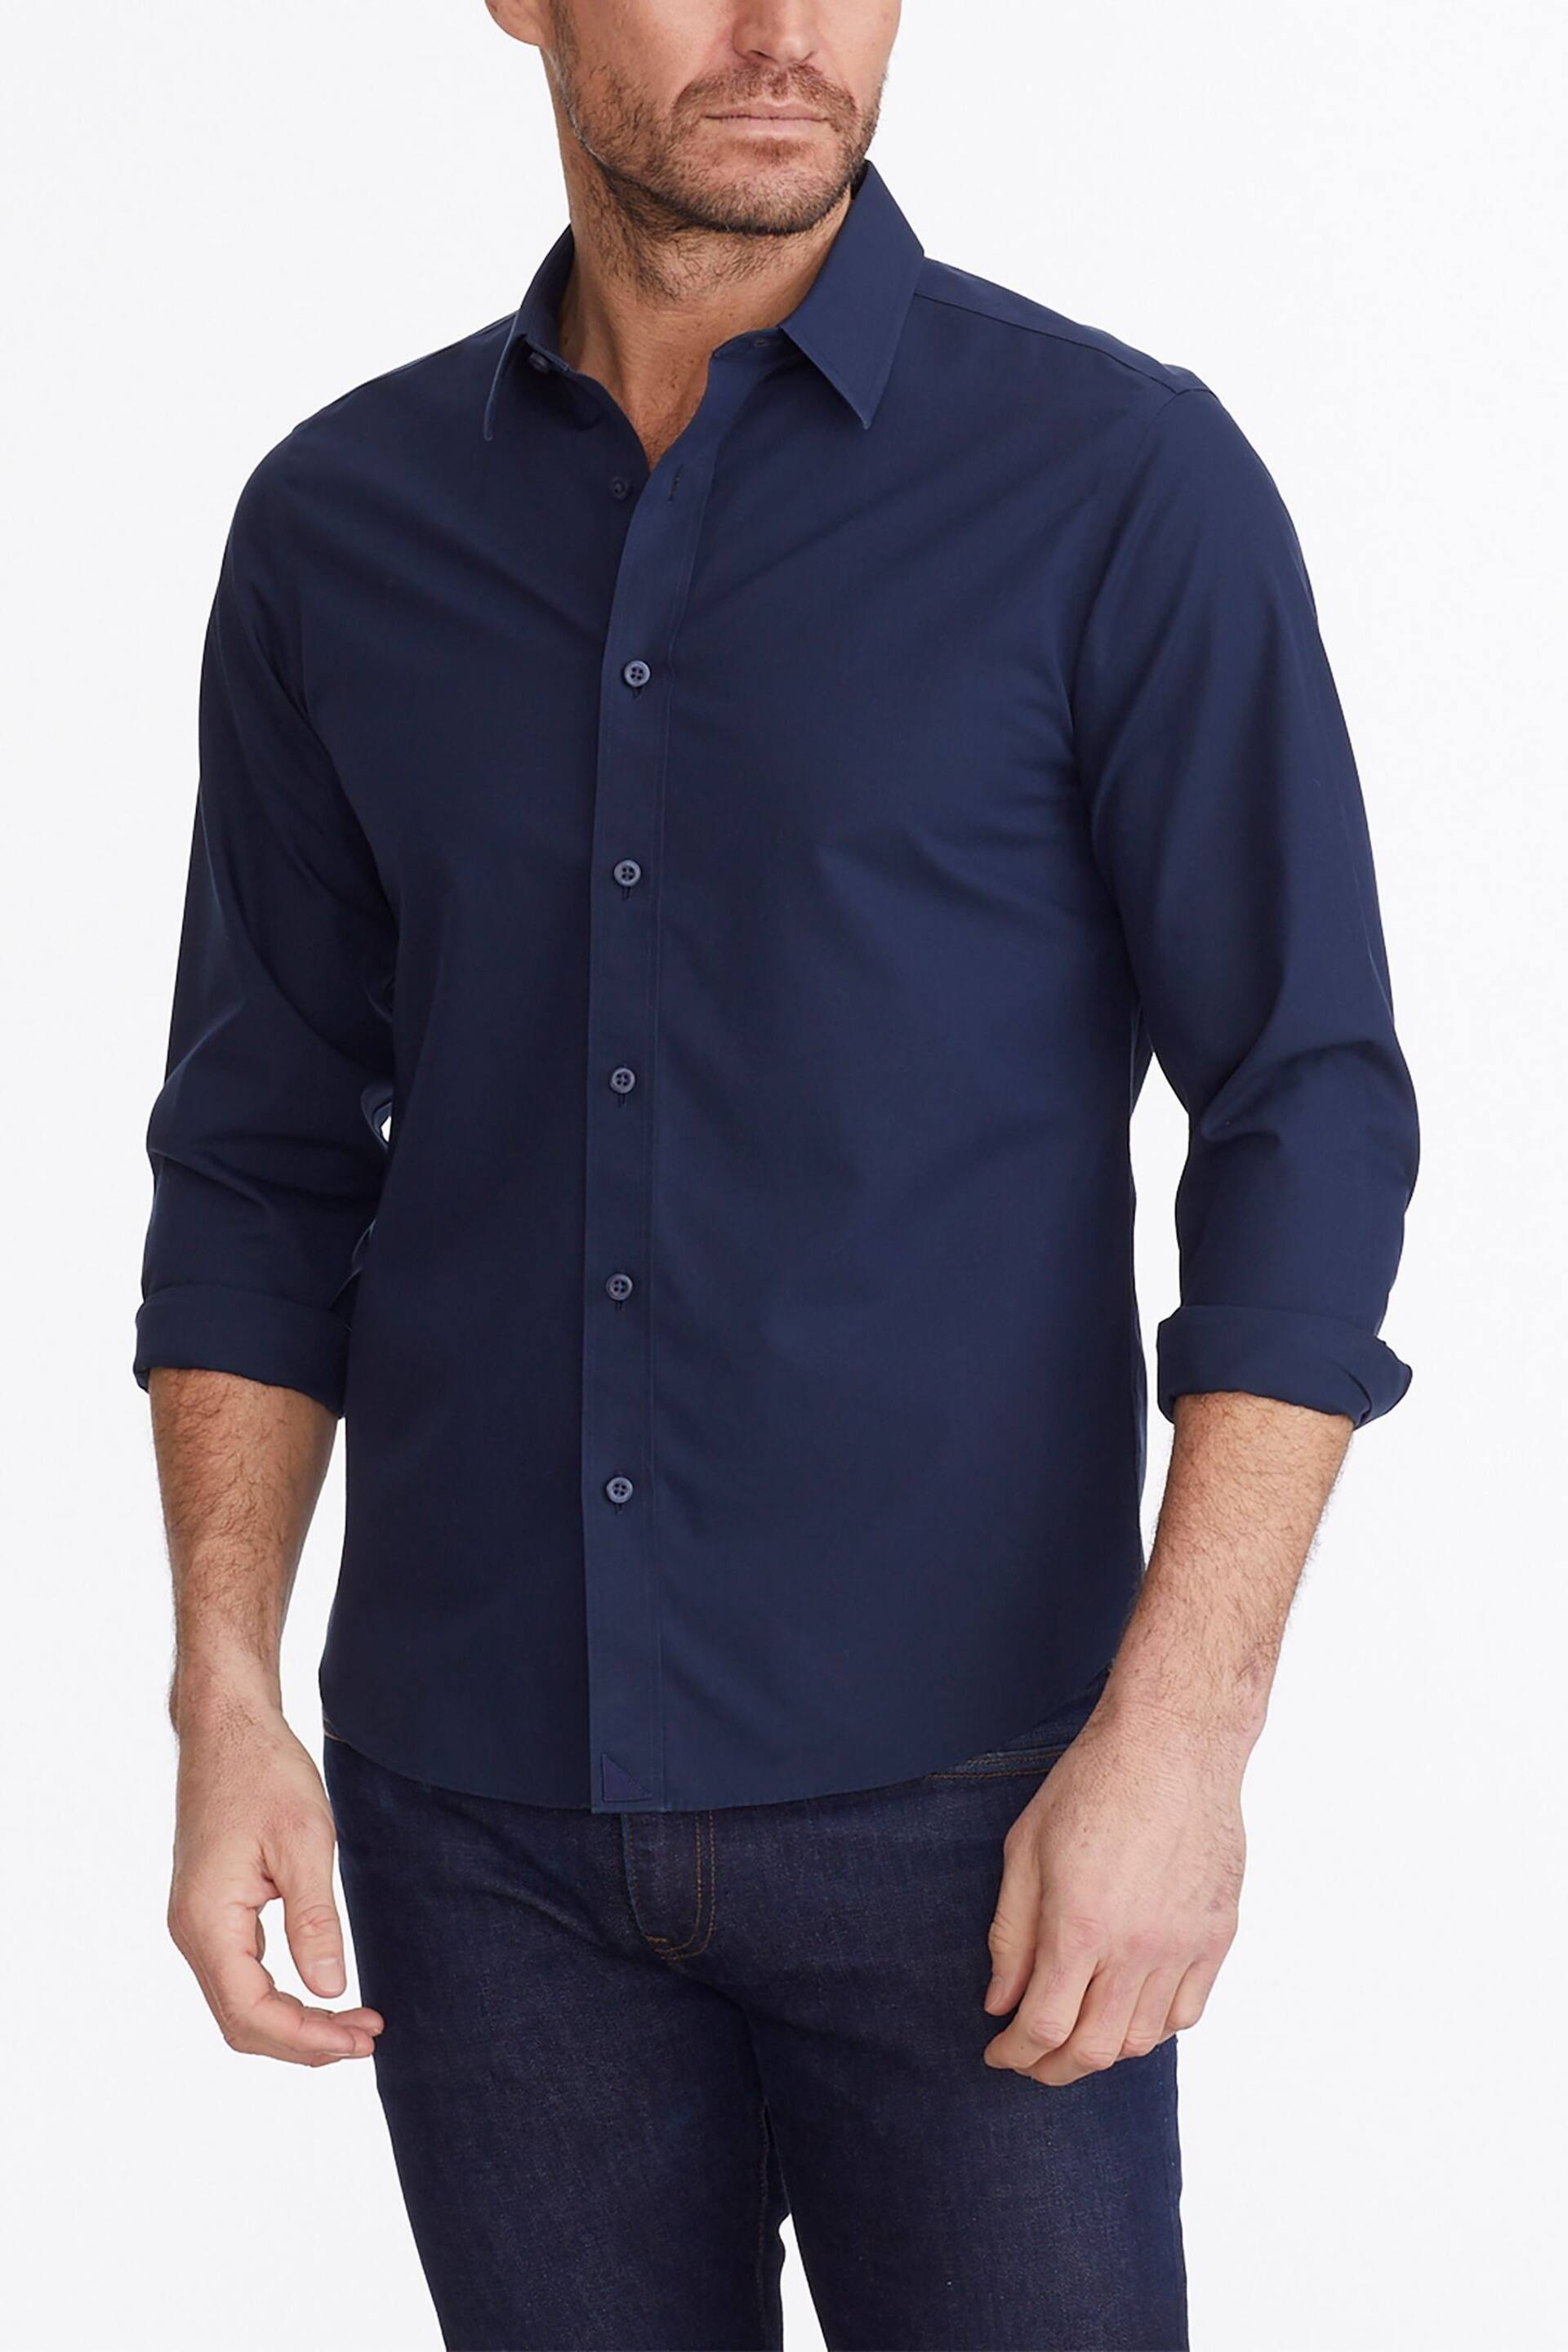 UNTUCKit Blue Wrinkle-Free Relaxed Fit Castello Shirt - Image 3 of 6